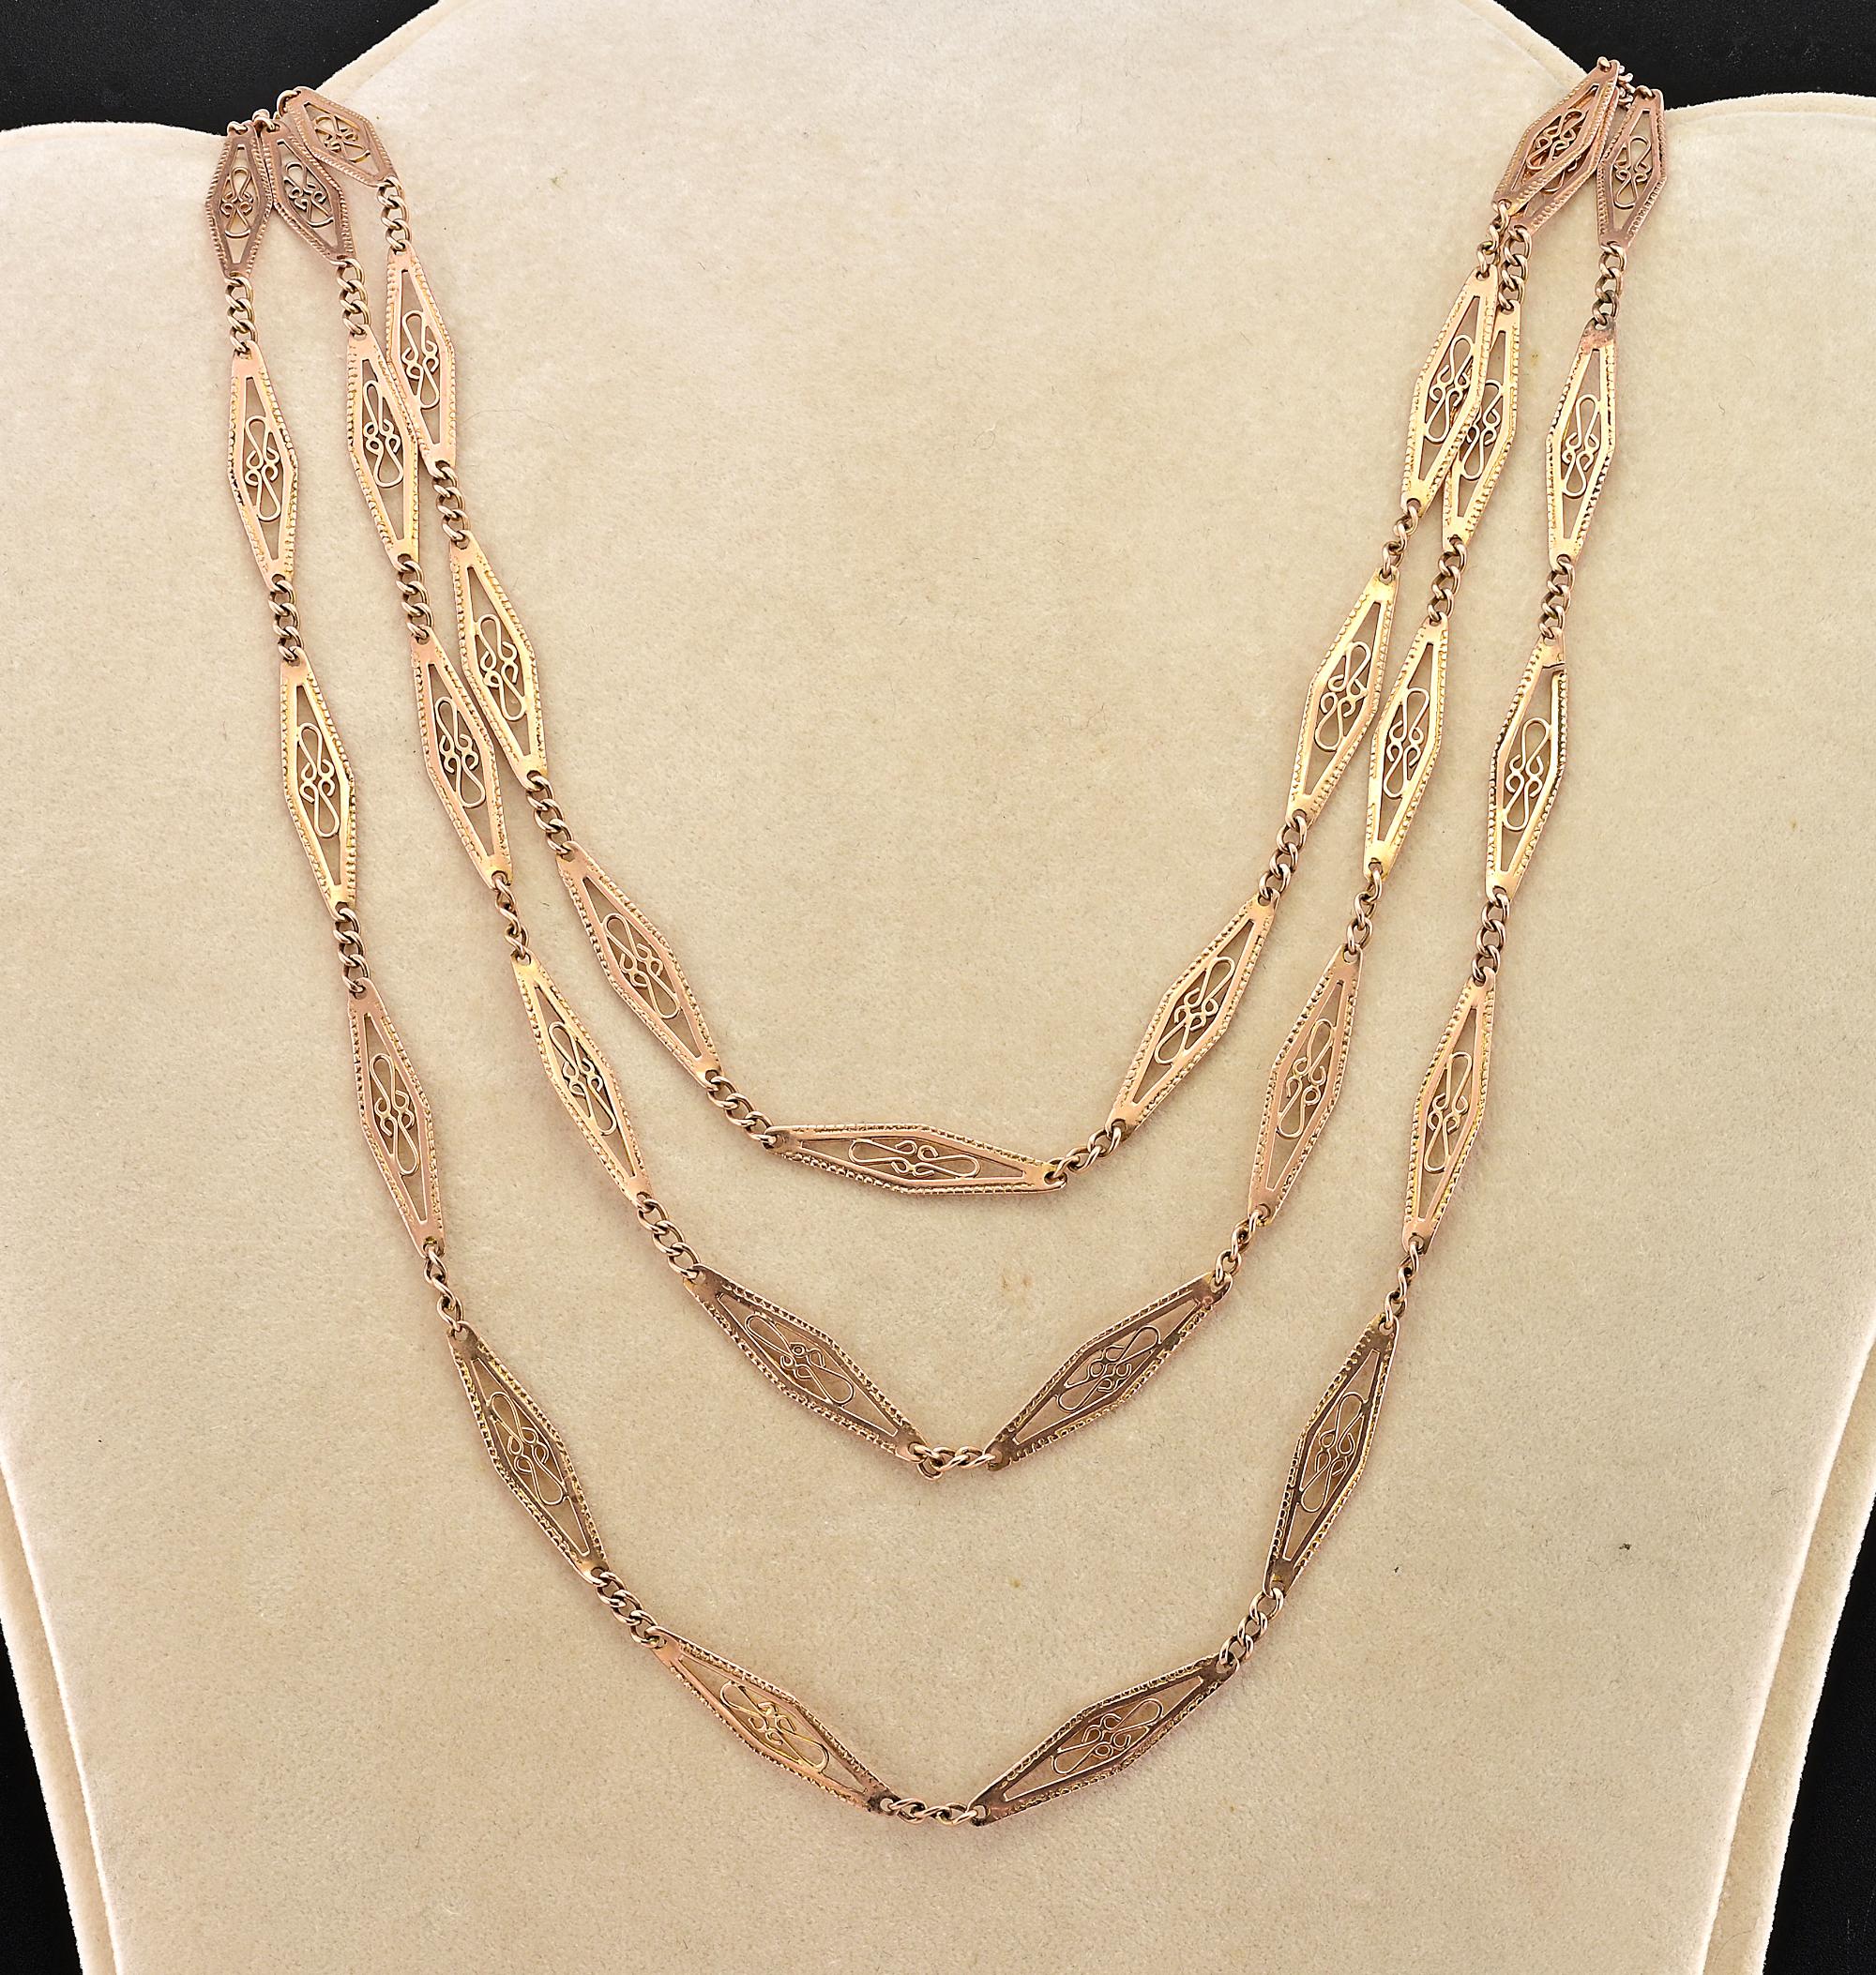 This rare and beautiful Art Nouveau period chain necklace is 1905 ca
Solid 9 KT rose gold weighs 26.3 grams
Magnificent example totally hand made by skillful workmanship of the past times, made of fascinating openwork in the shape of elongated